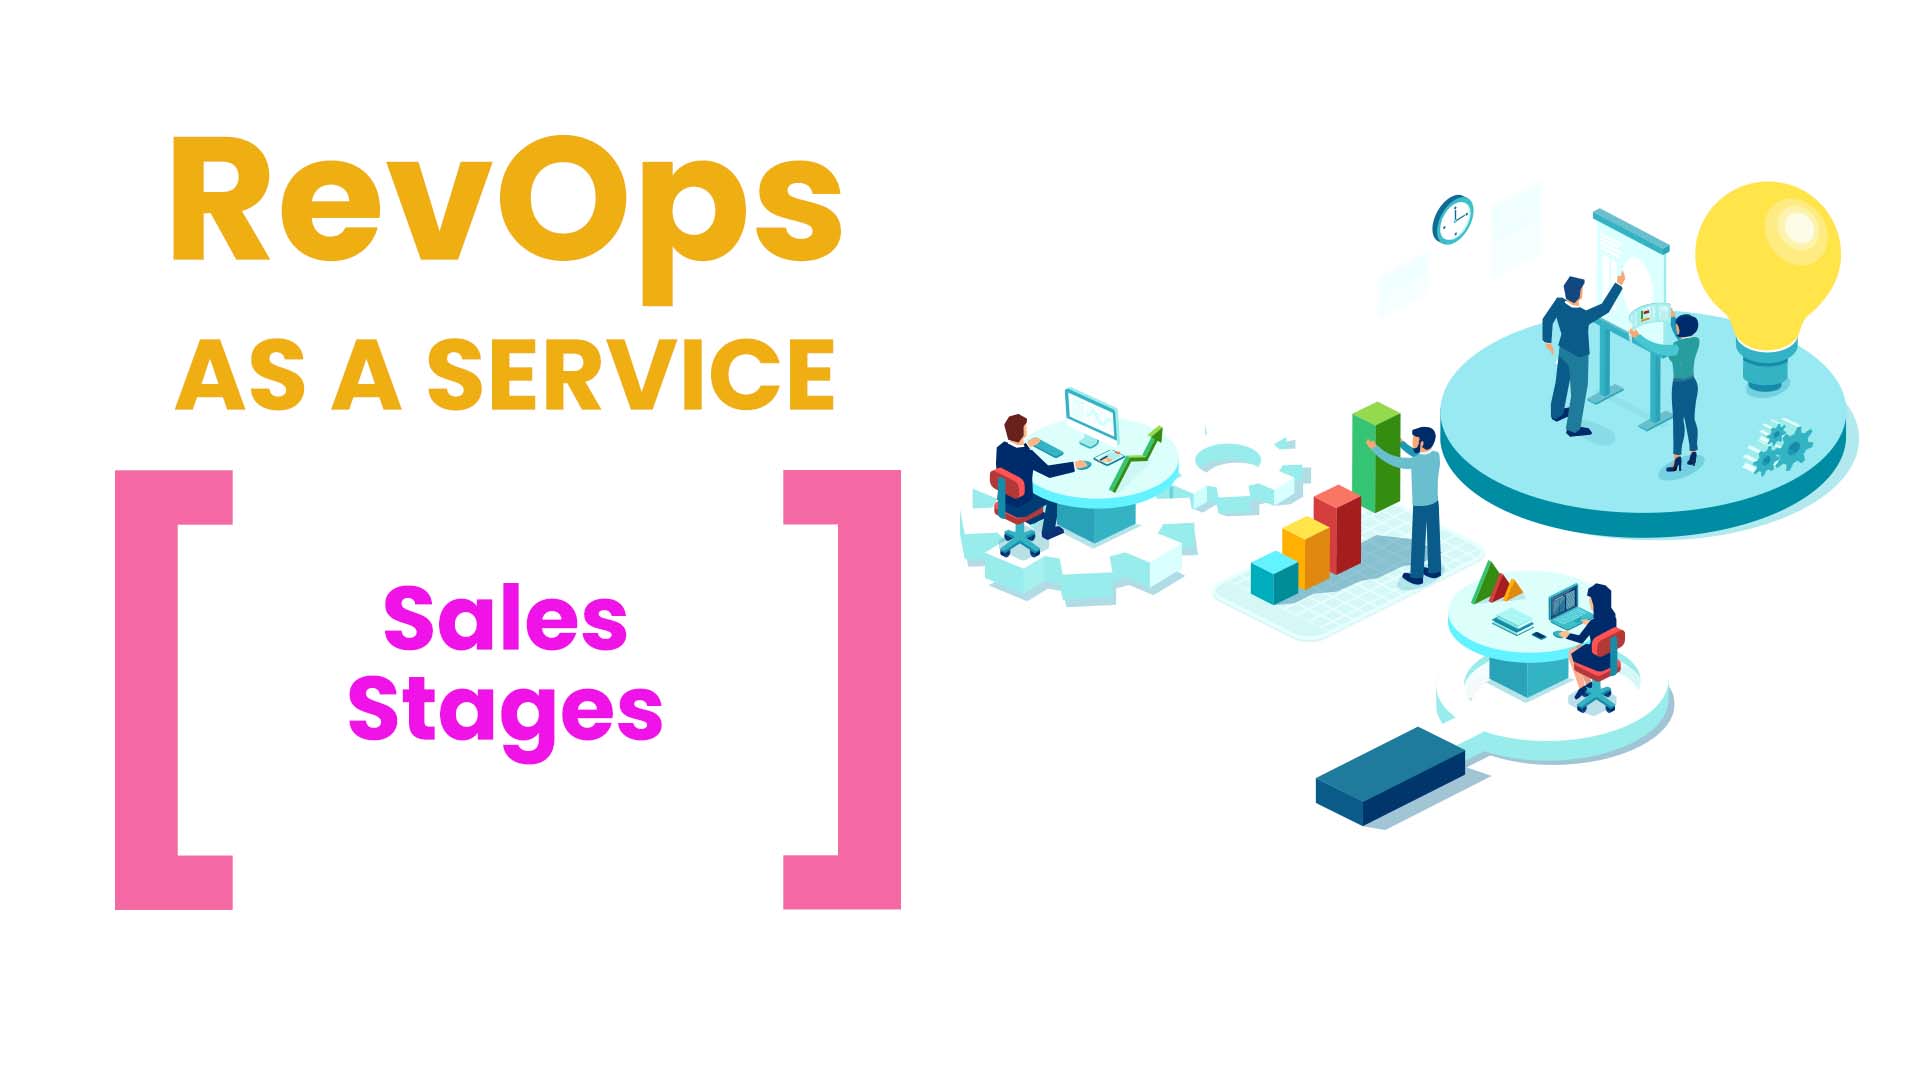 RevOps as a Service: Sales Stages